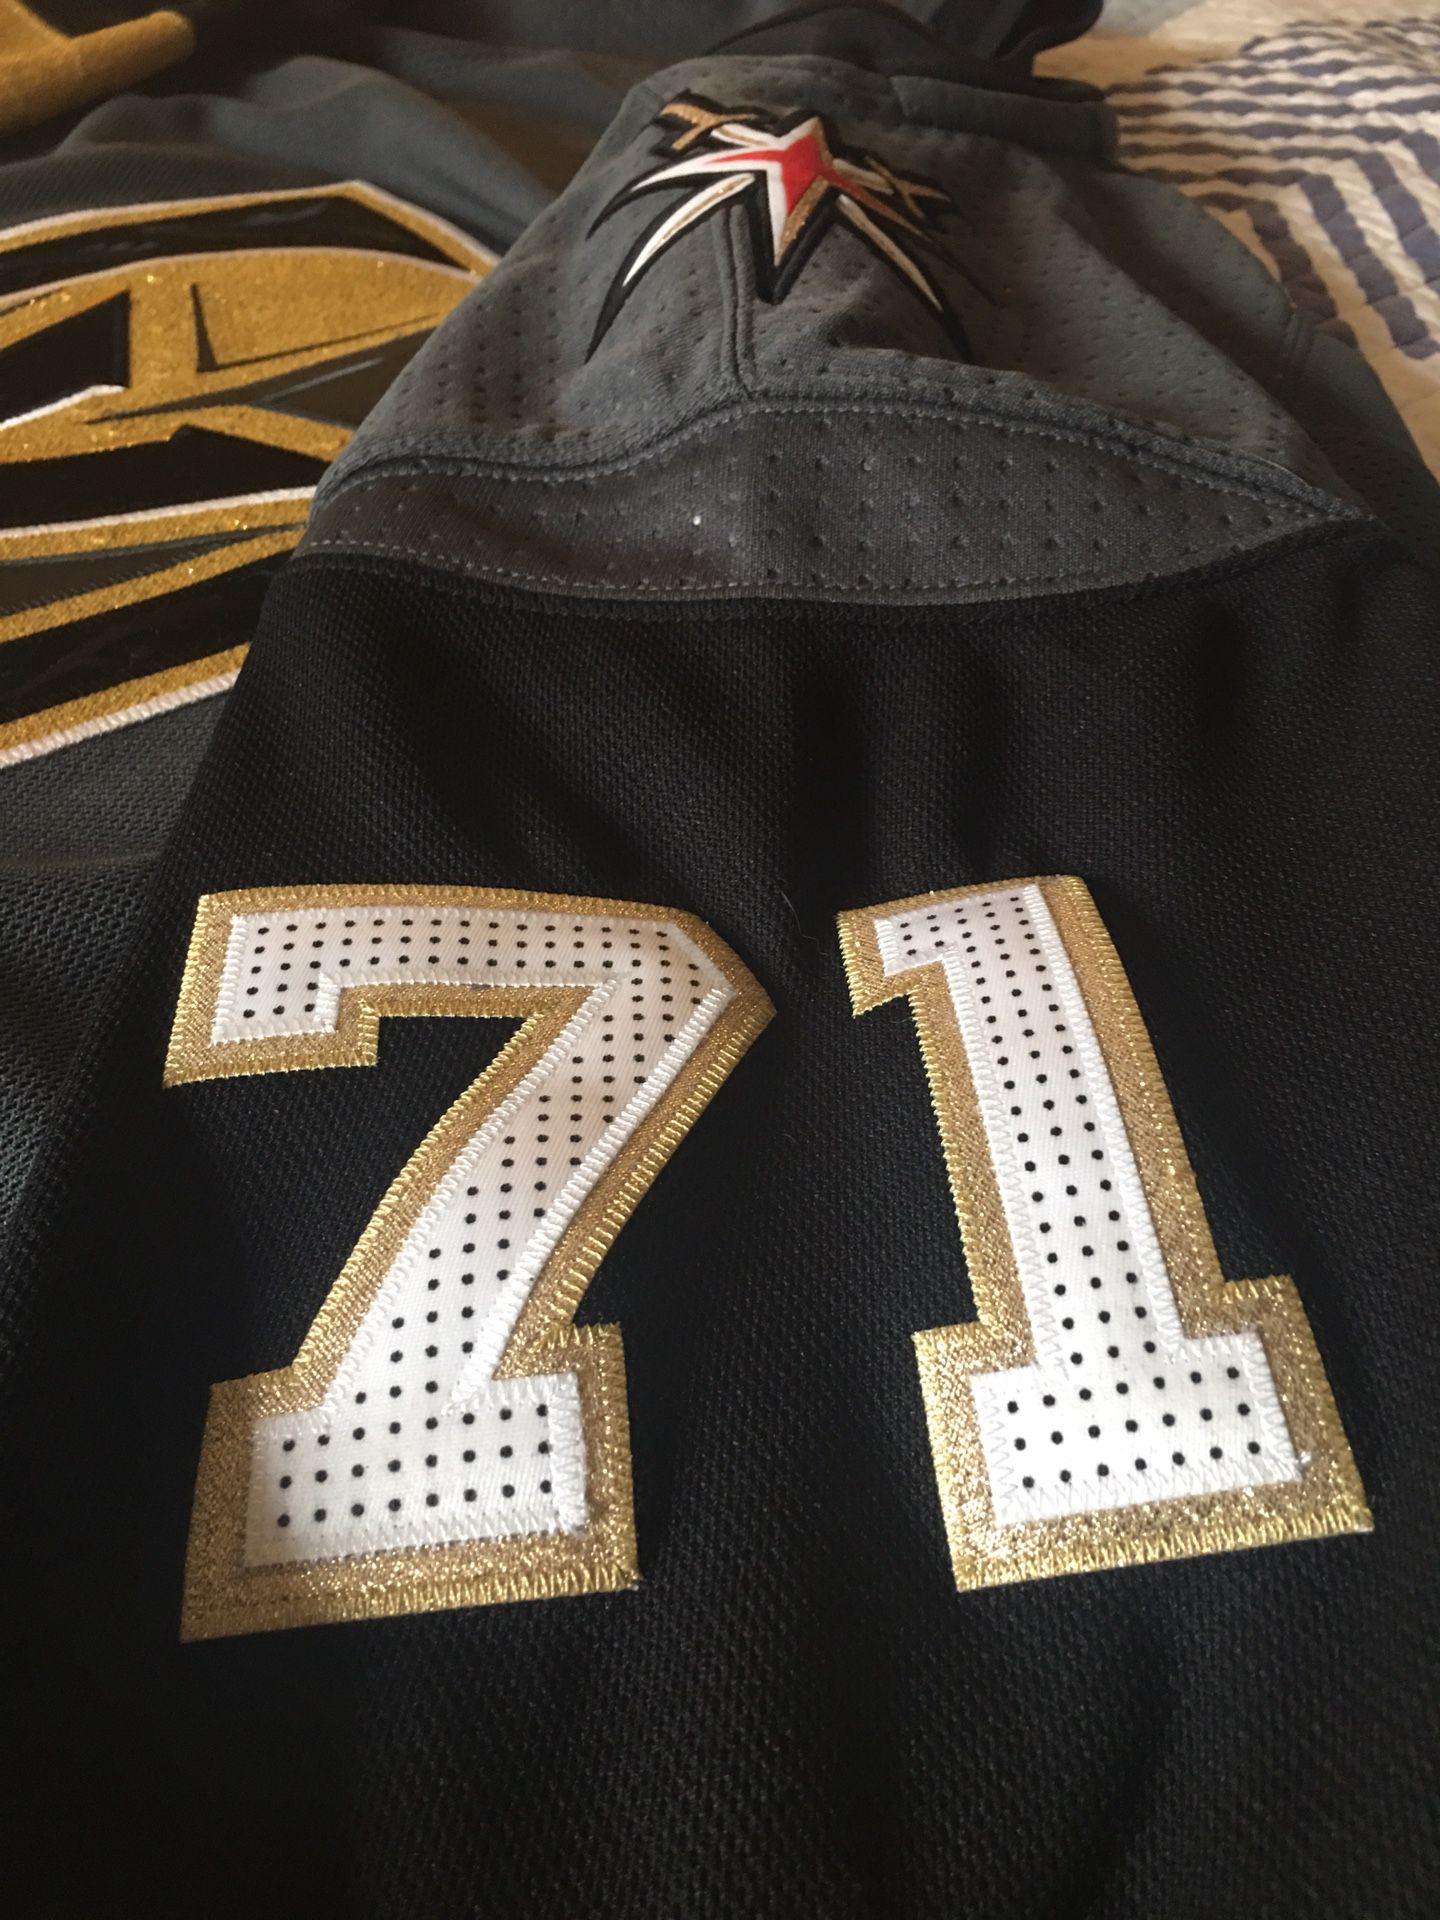 Brand New 100% Authentic Adidas Limited Edition Vegas Golden Knights VGK Reverse  Retro 2022/2023 Jersey Sizes 52 for Sale in Las Vegas, NV - OfferUp